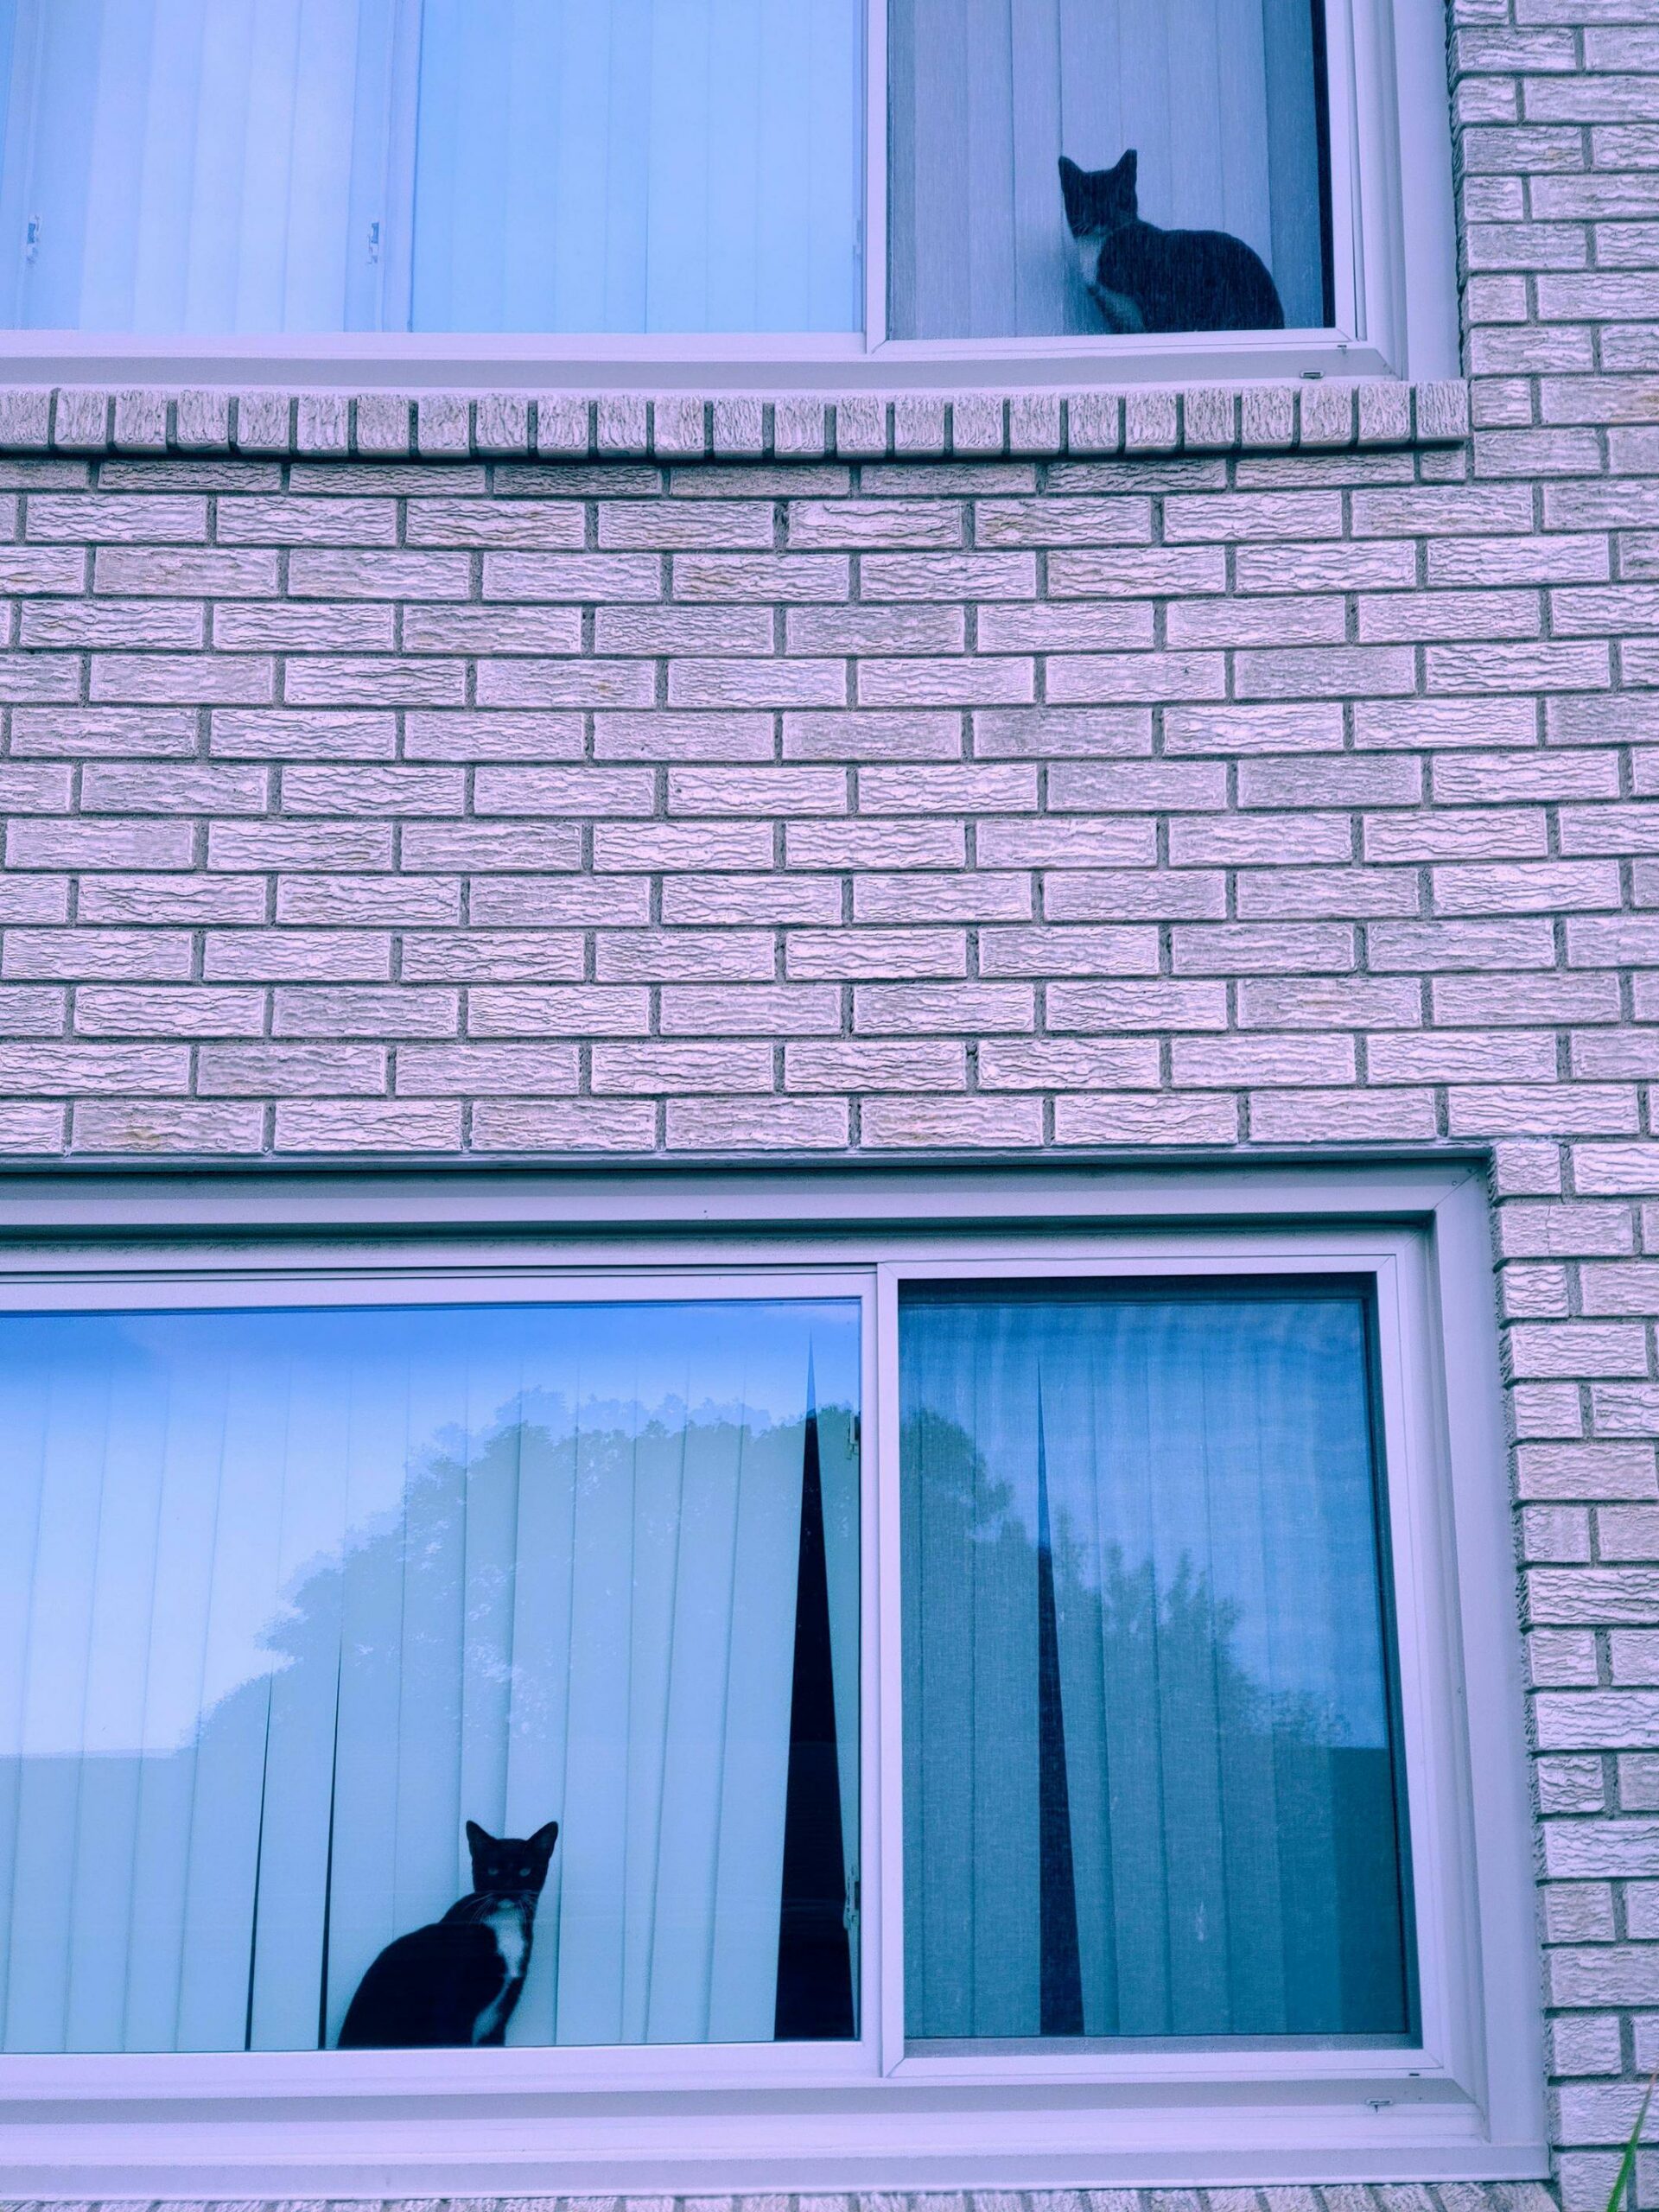 identical cats sitting in windows in apartment building